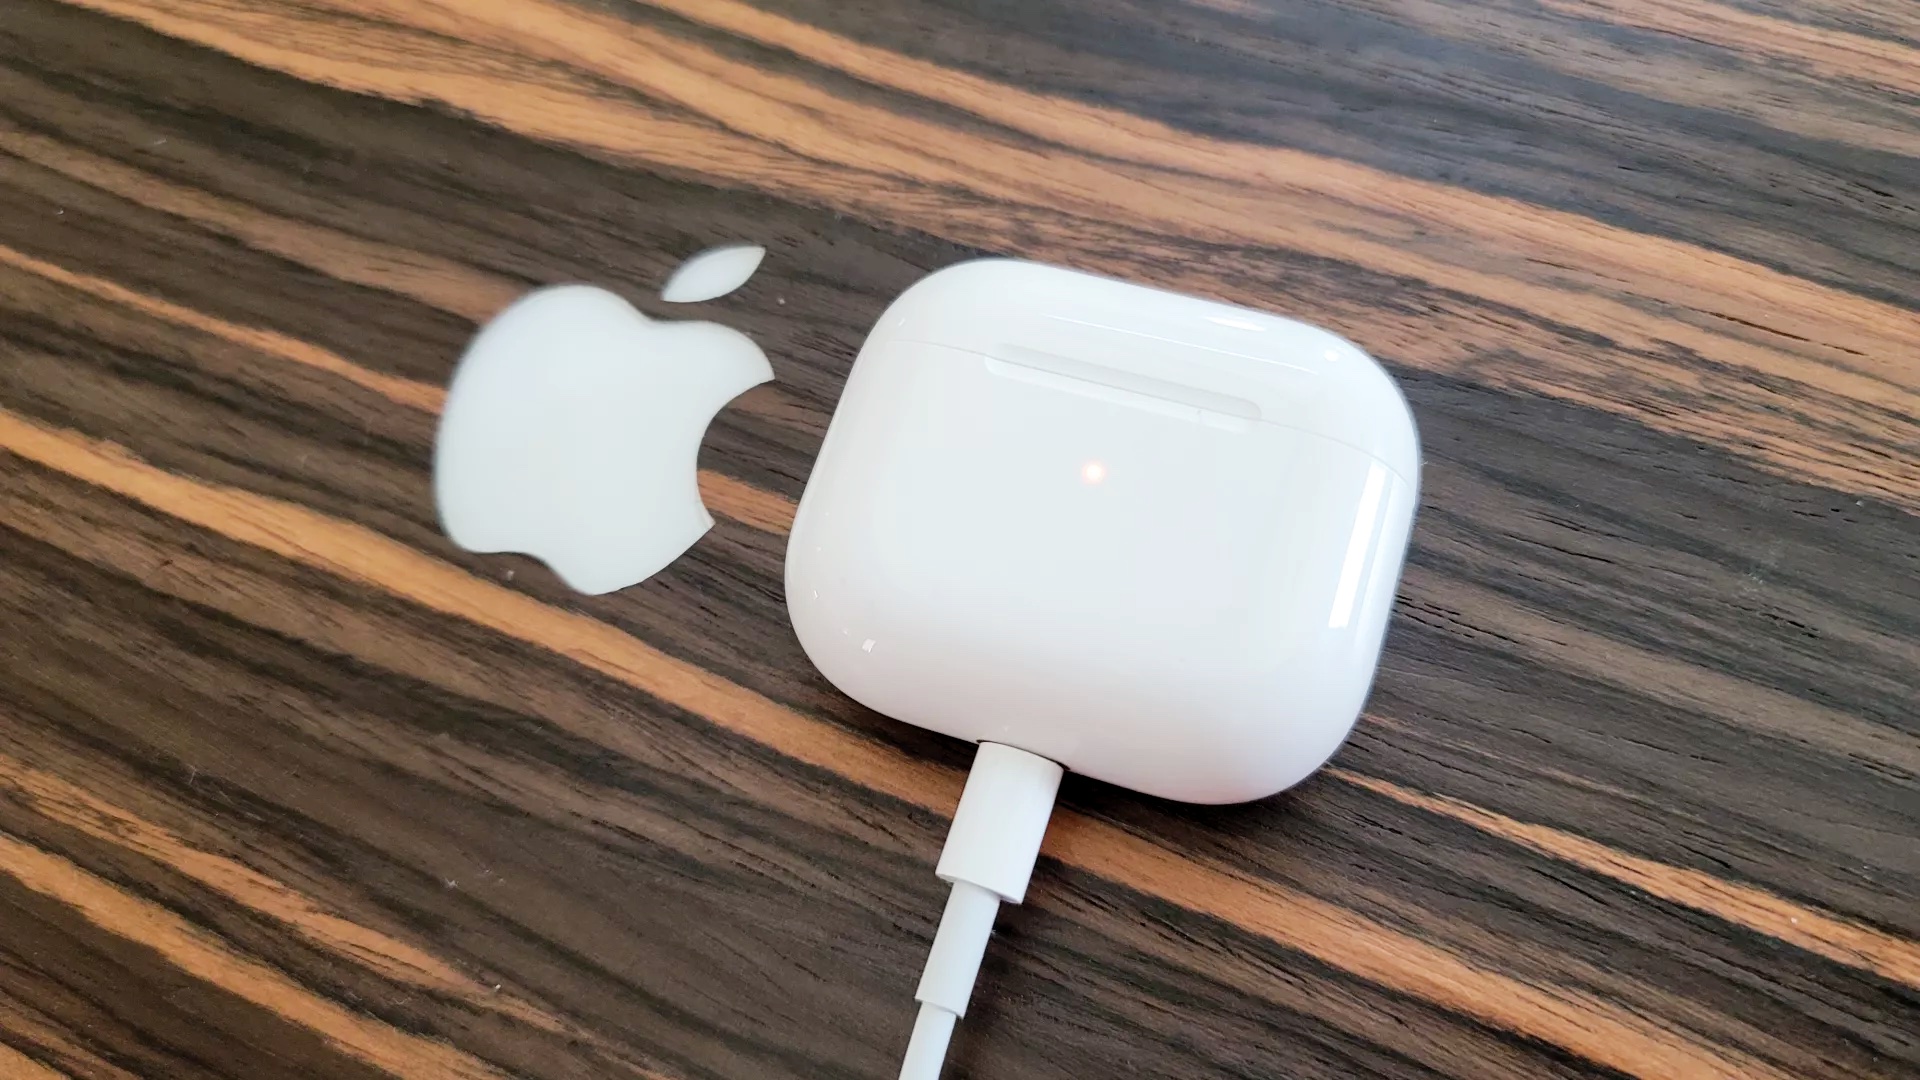 AirPods just tipped to lose the Lightning port after AirPods Pro 2